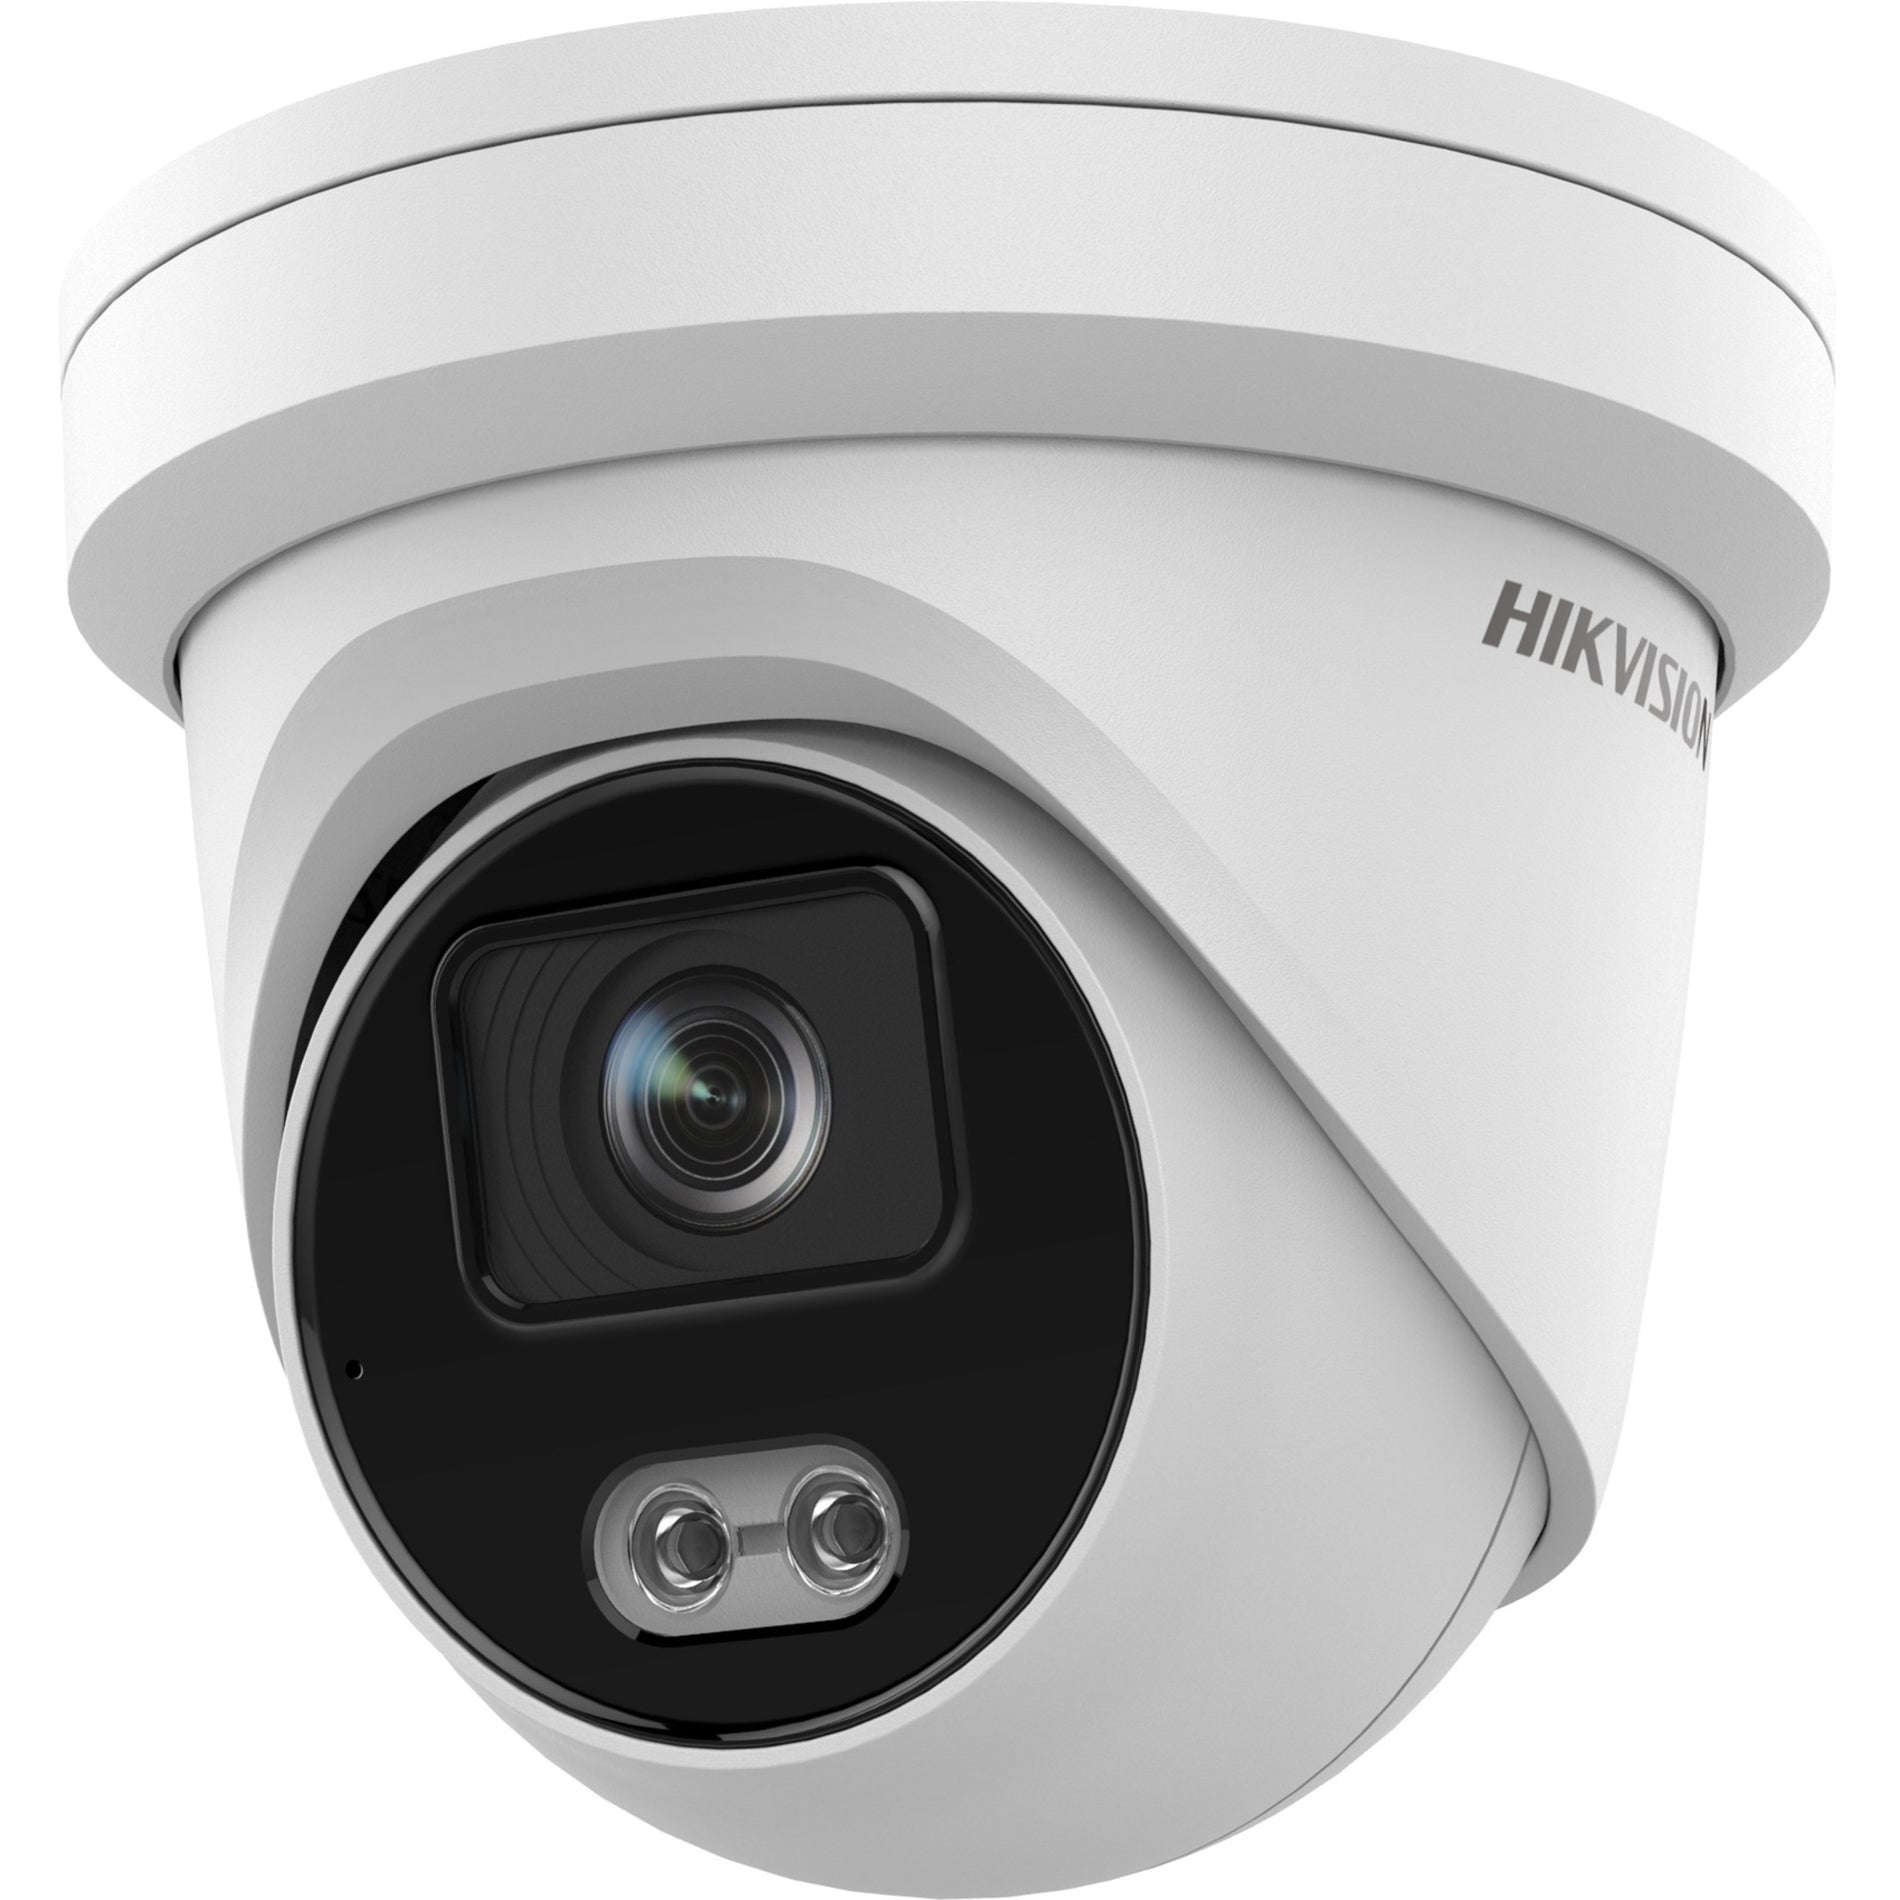 Hikvision DS-2CD2347G2-LU 4MM EasyIP 4 MP ColorVu Fixed Turret Network Camera, D/N IR, 4mm Lens, 2688 x 1520 Resolution